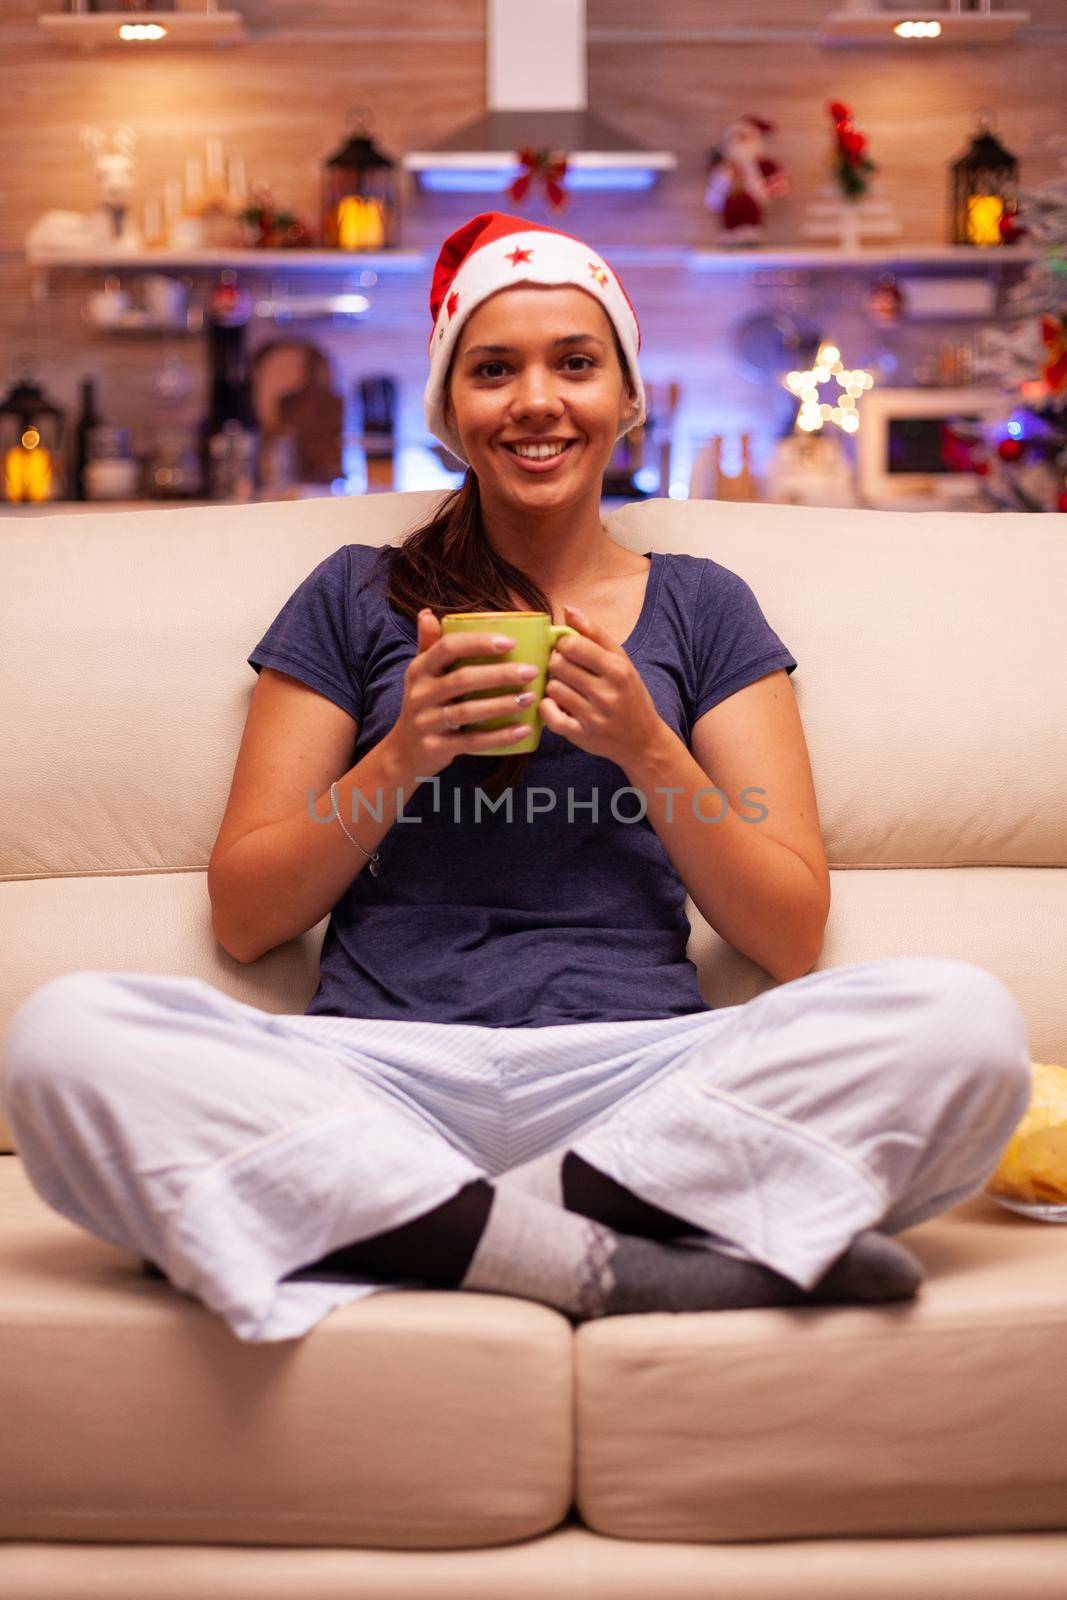 Portrait of smiling woman wearing red santa hat sitting in lotus position on couch enjoying winter holiday. Girl in comfy clothes celebrating christmas season in xmas decorated kitchen